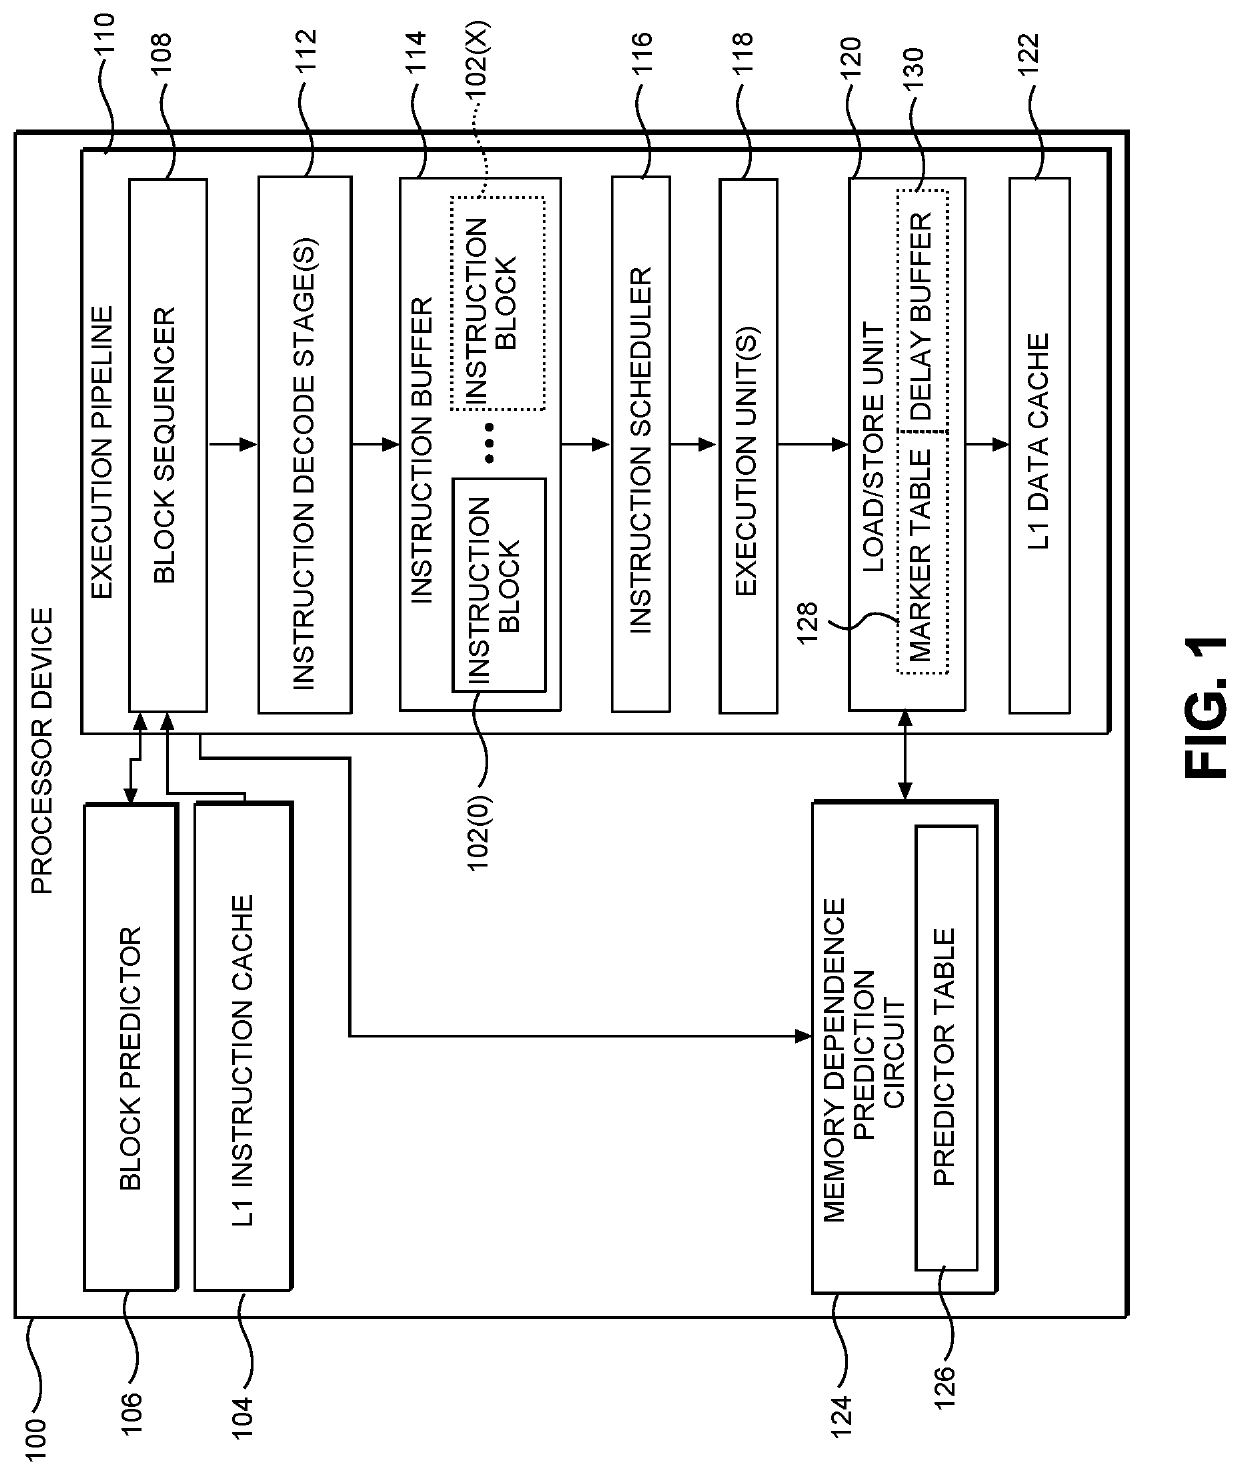 Providing memory dependence prediction in block-atomic dataflow architectures